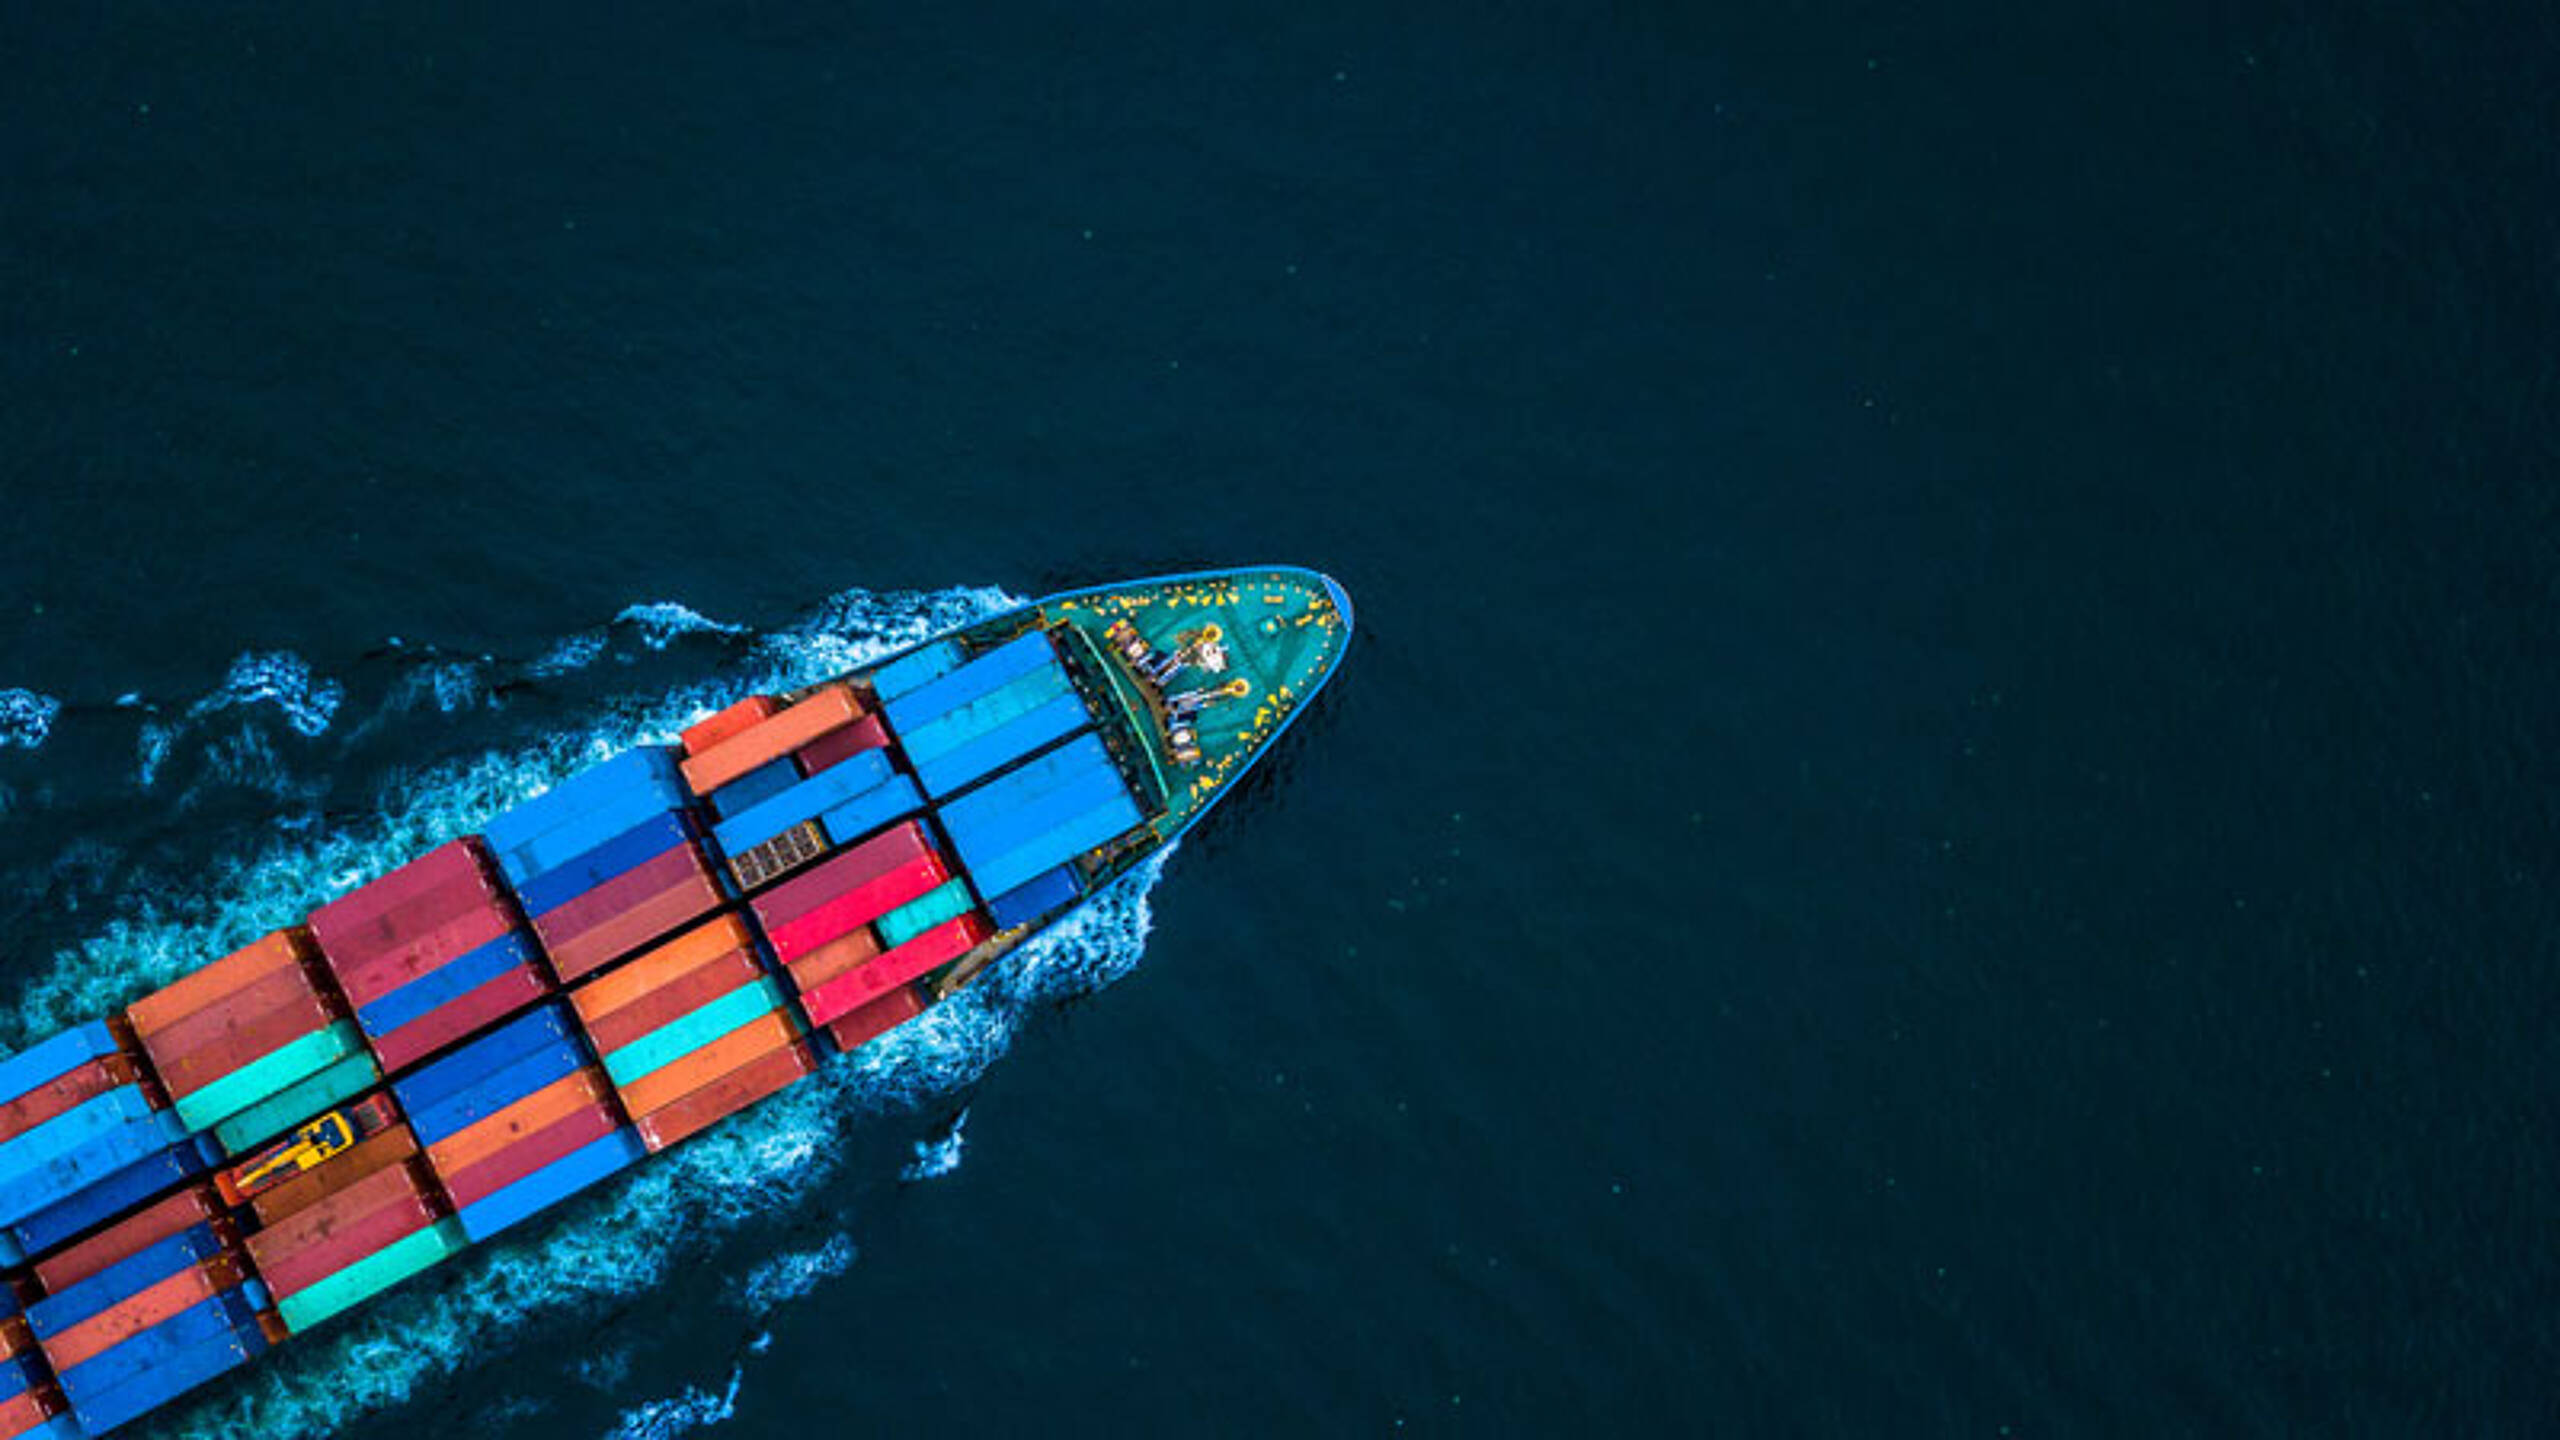 Business behemoths push shipping suppliers for zero-emission options